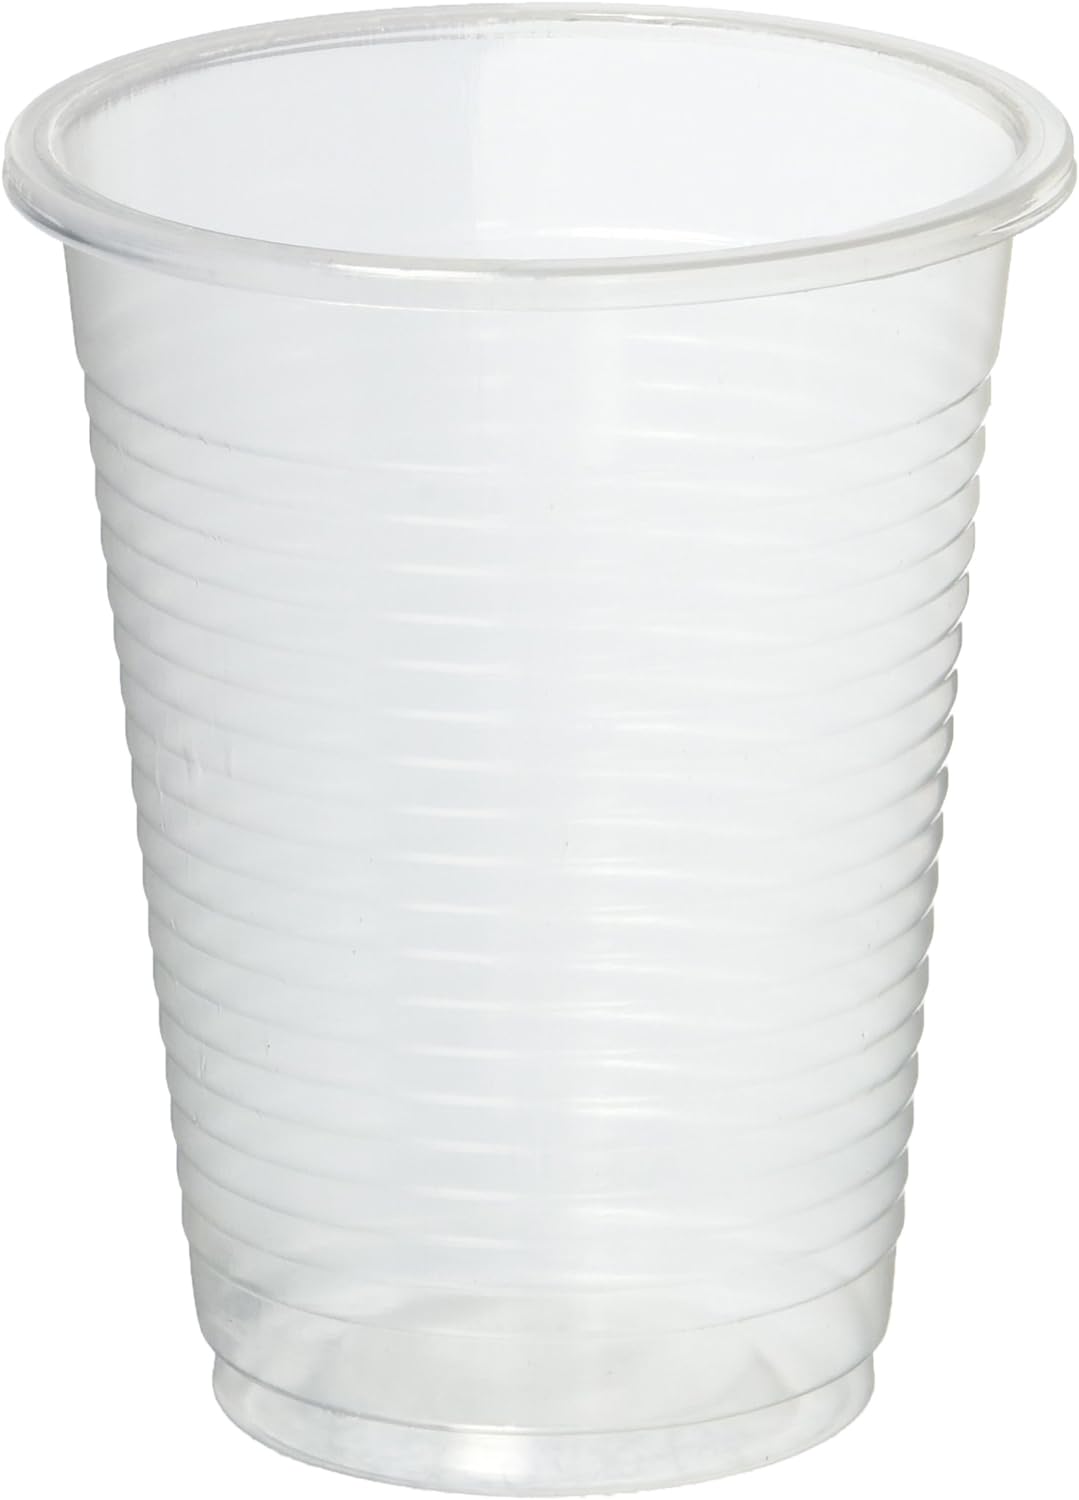 Cups, 7 oz Plastic, Clear, 100/pack, Case of 1200 cups